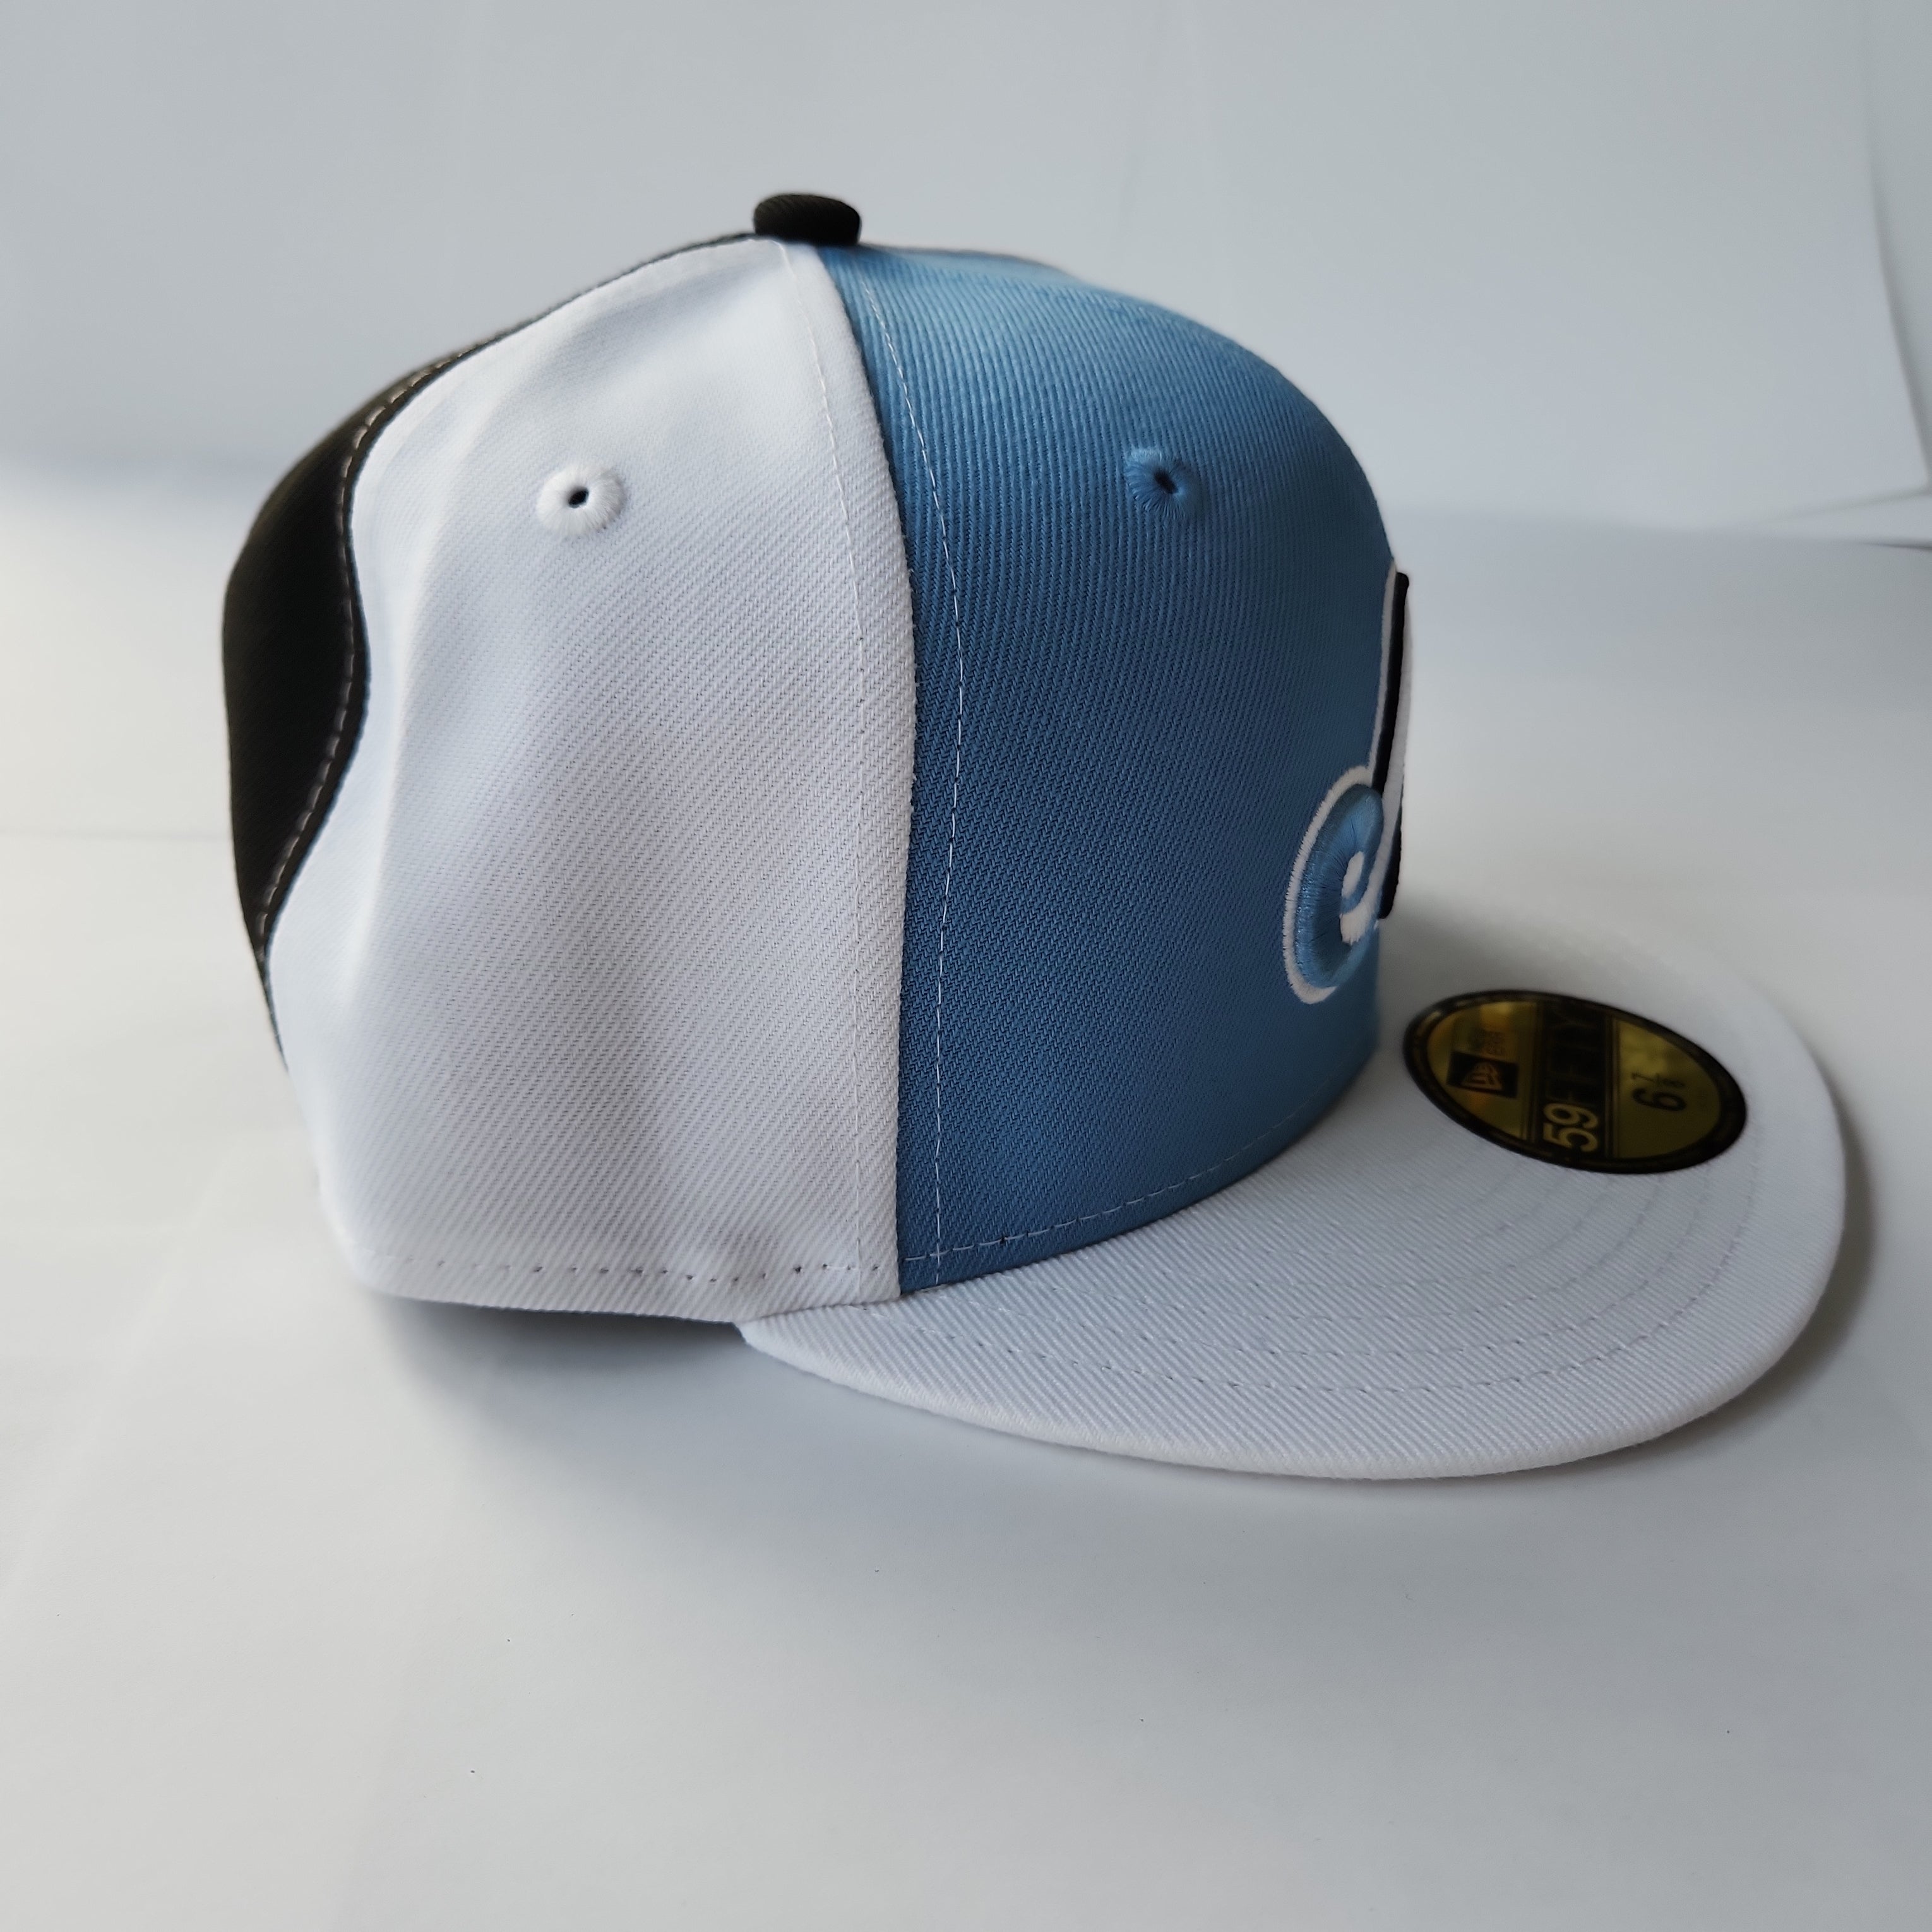 Montreal Expos MLB New Era Men's Light Blue/White 59Fifty Cooperstown